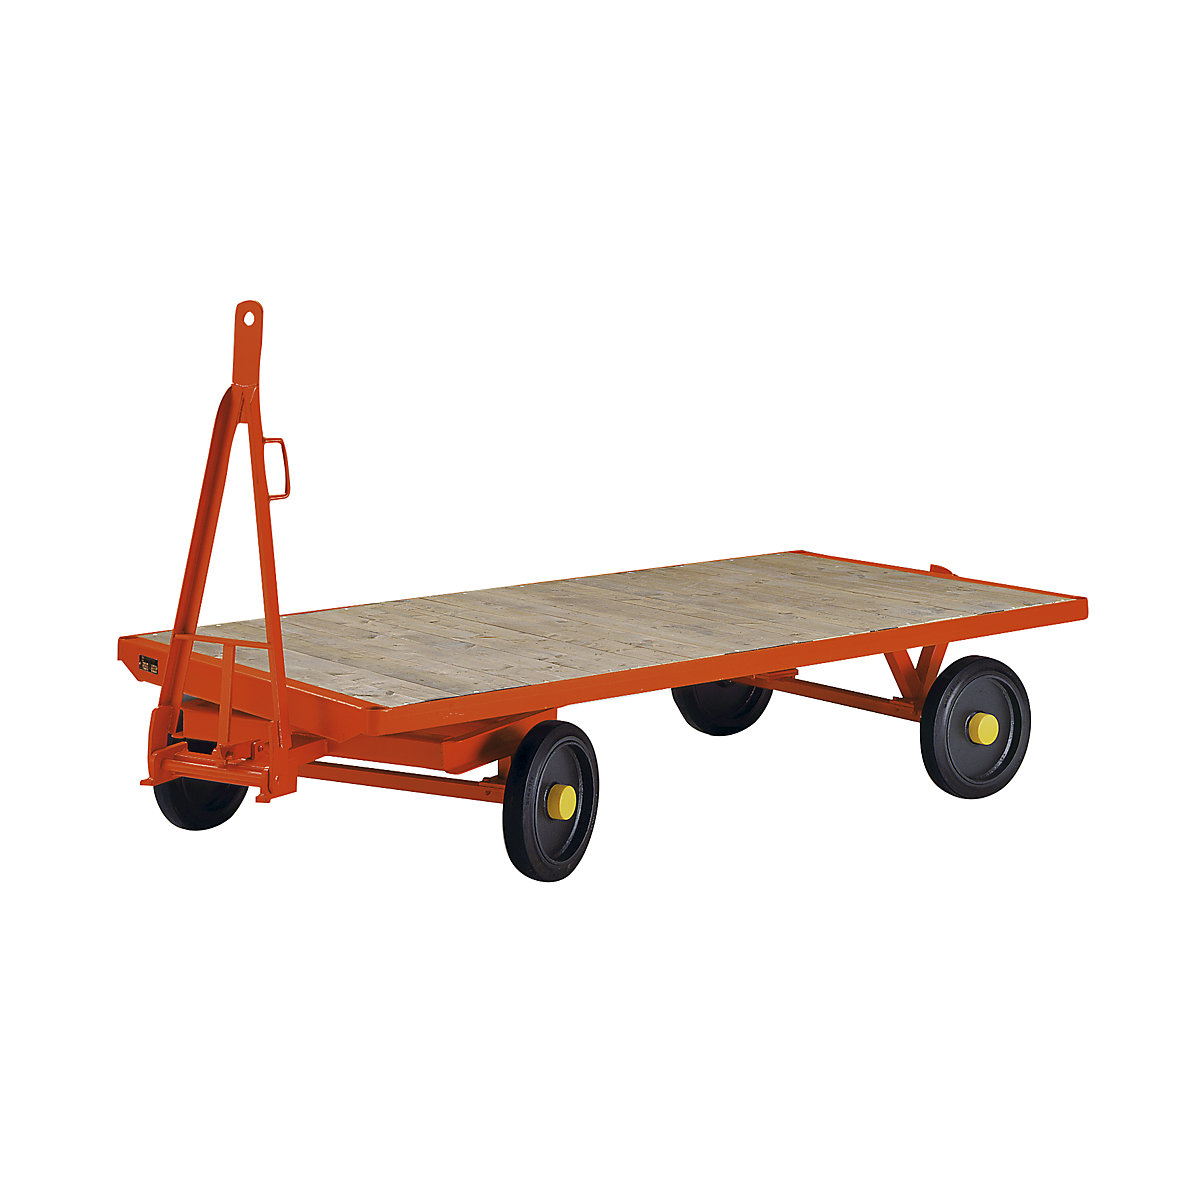 Trailer, 2-wheel turntable steering, max. load 5 t, platform 2.0 x 1.0 m, solid rubber tyres